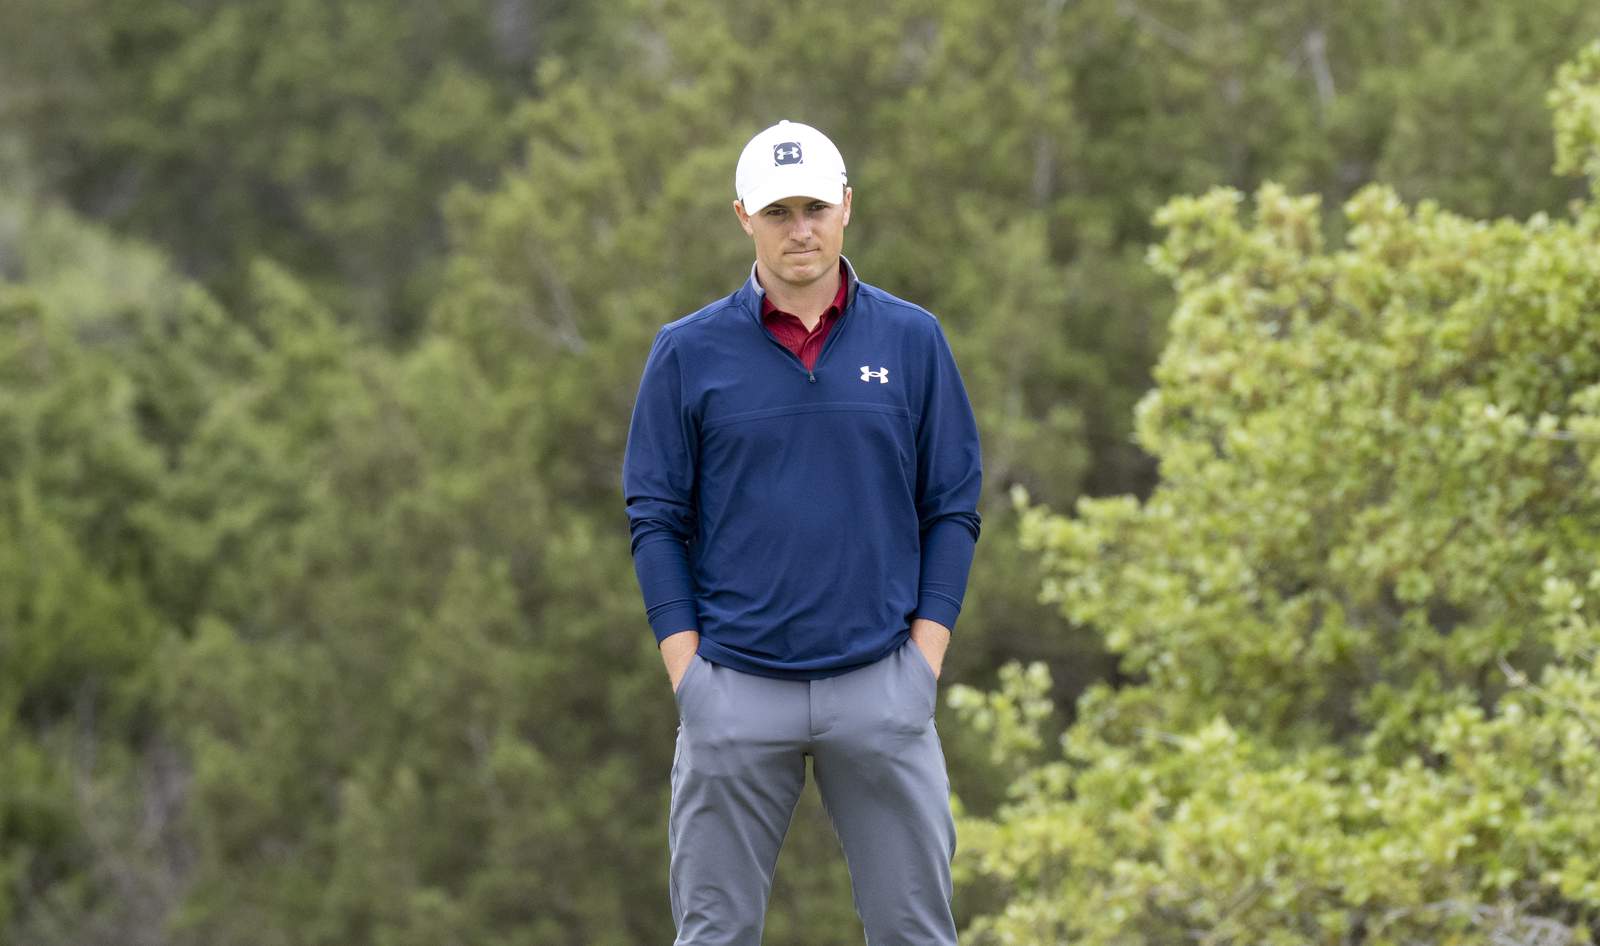 Jordan Spieth ends drought with victory at Texas Open